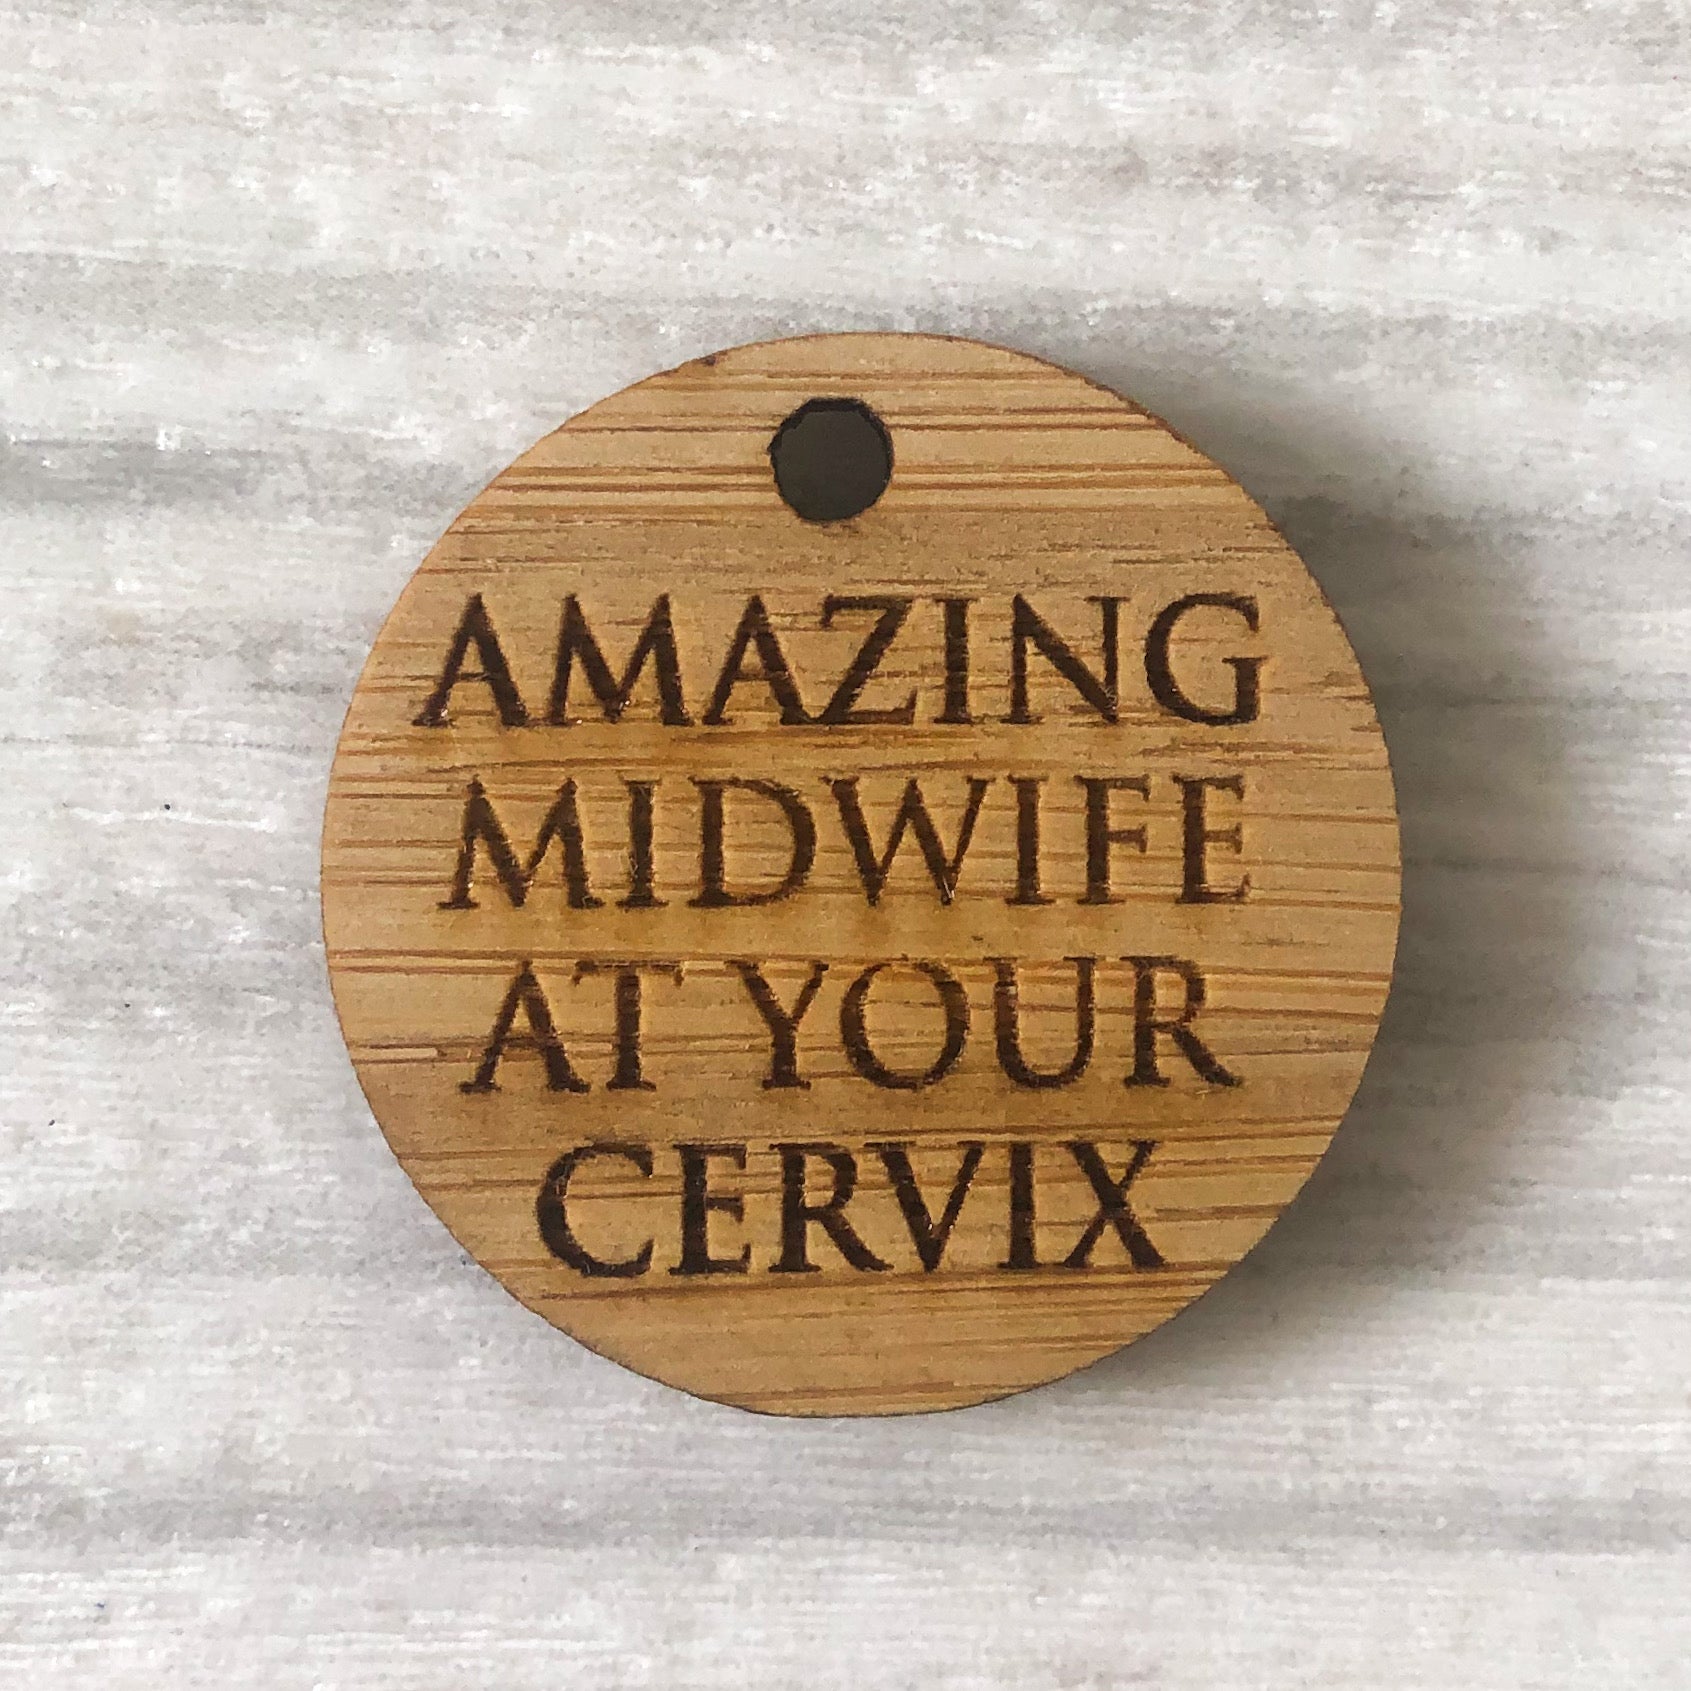 Add on tag - amazing midwife at your cervix